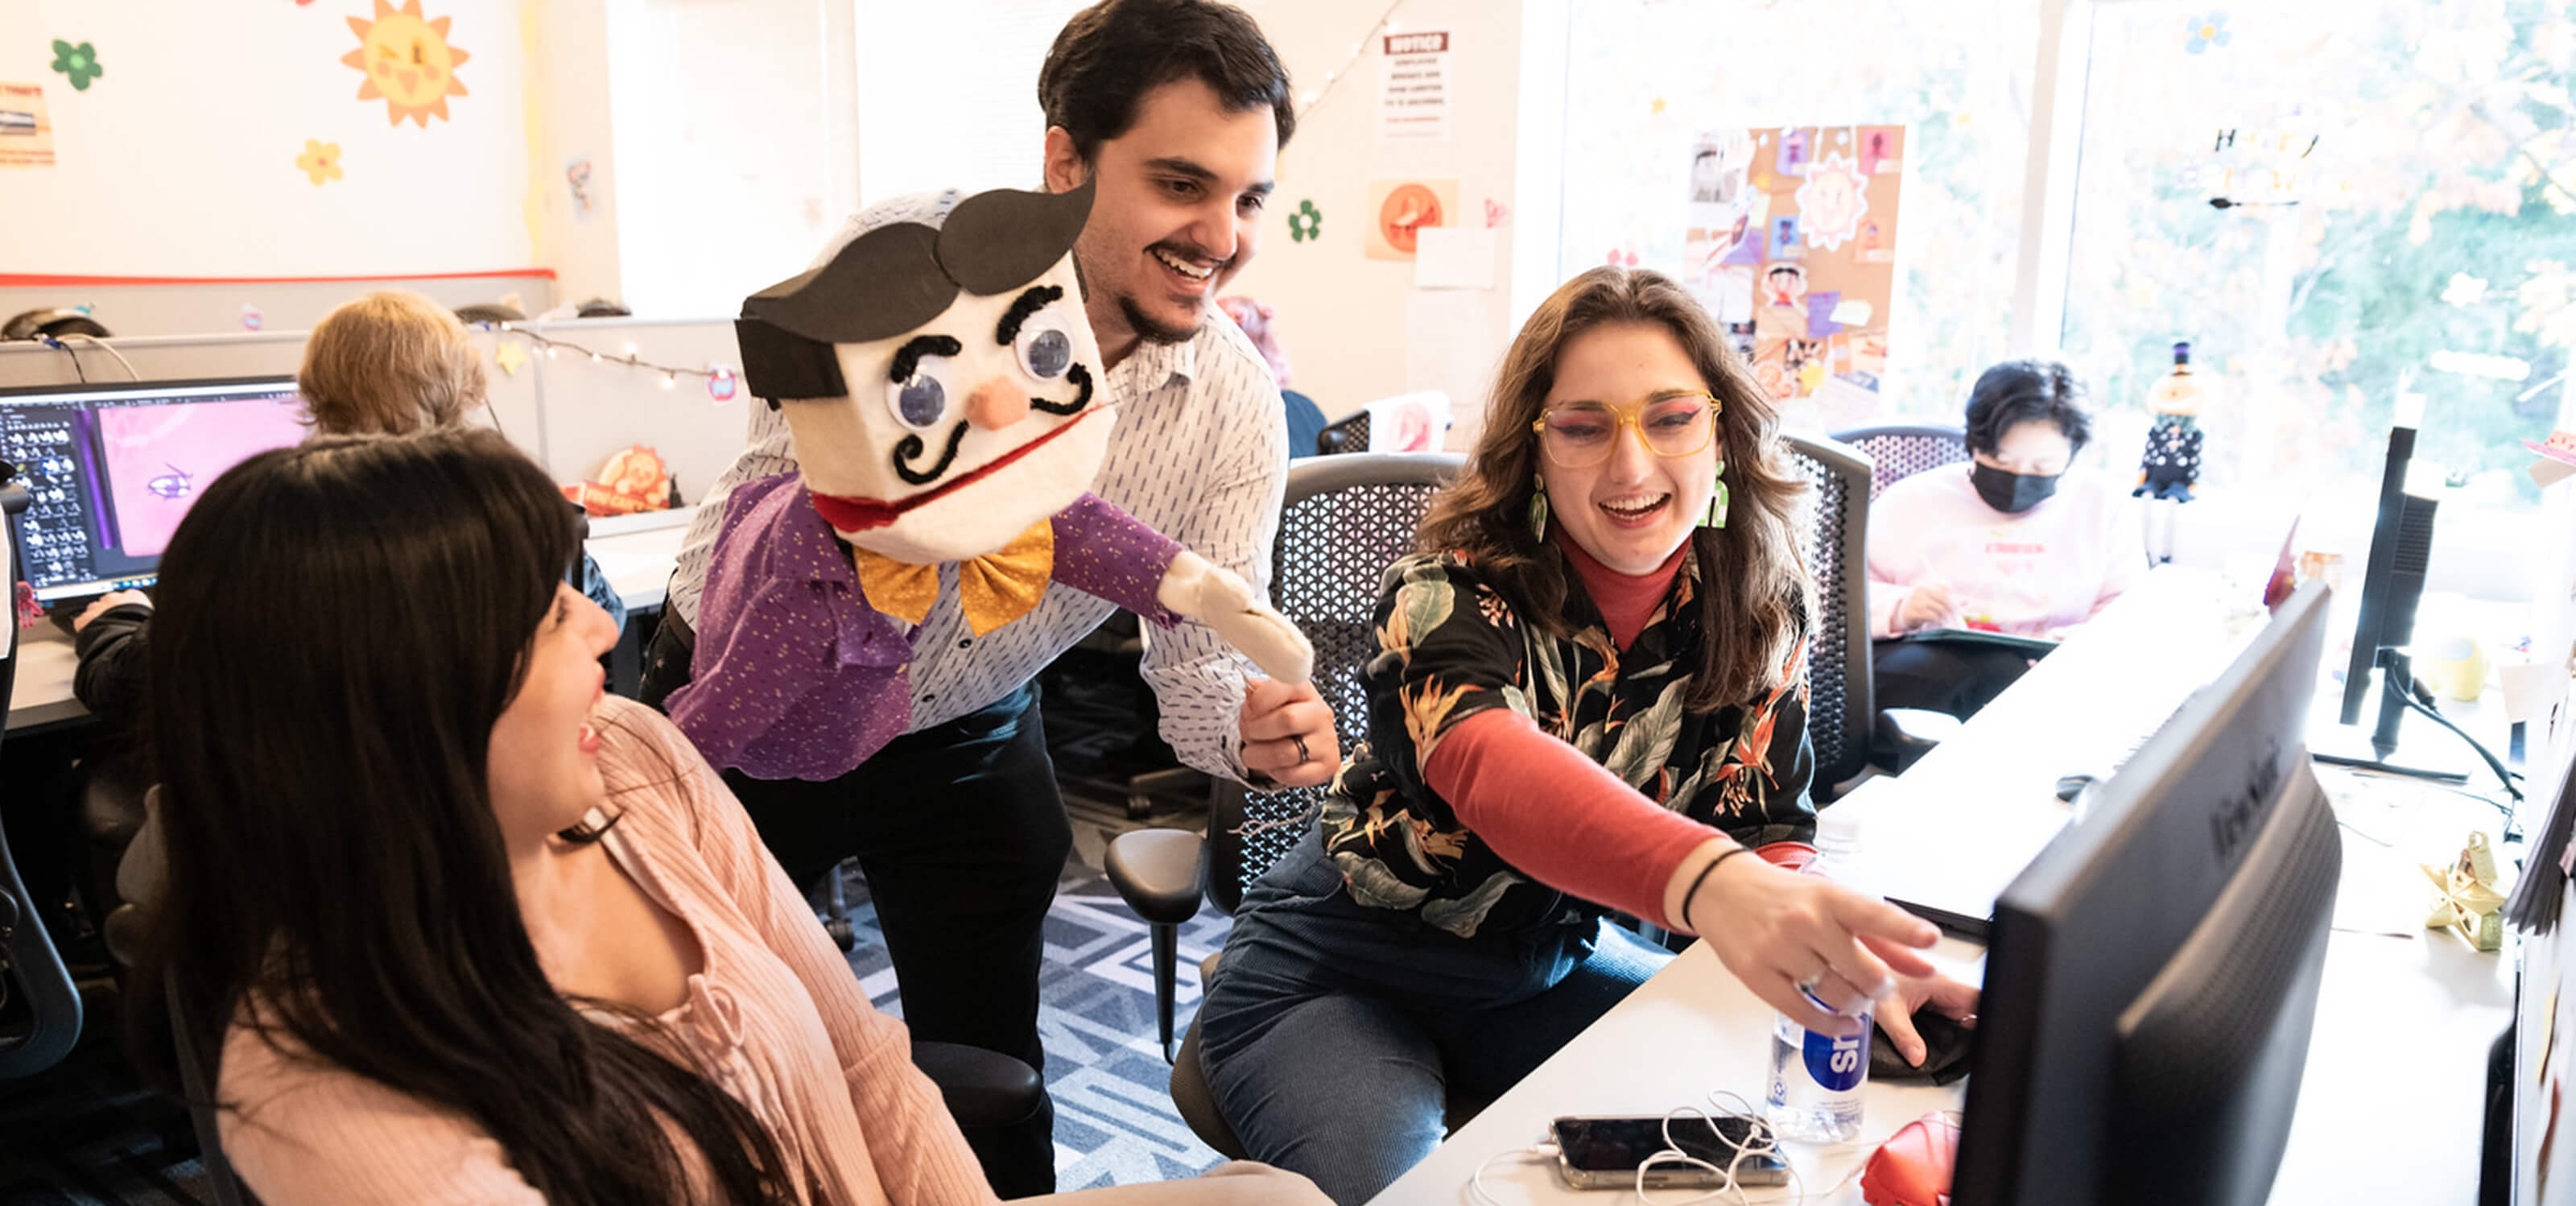 Three DigiPen students, one holding a puppet, smile as they look at a computer in the campus production lab.